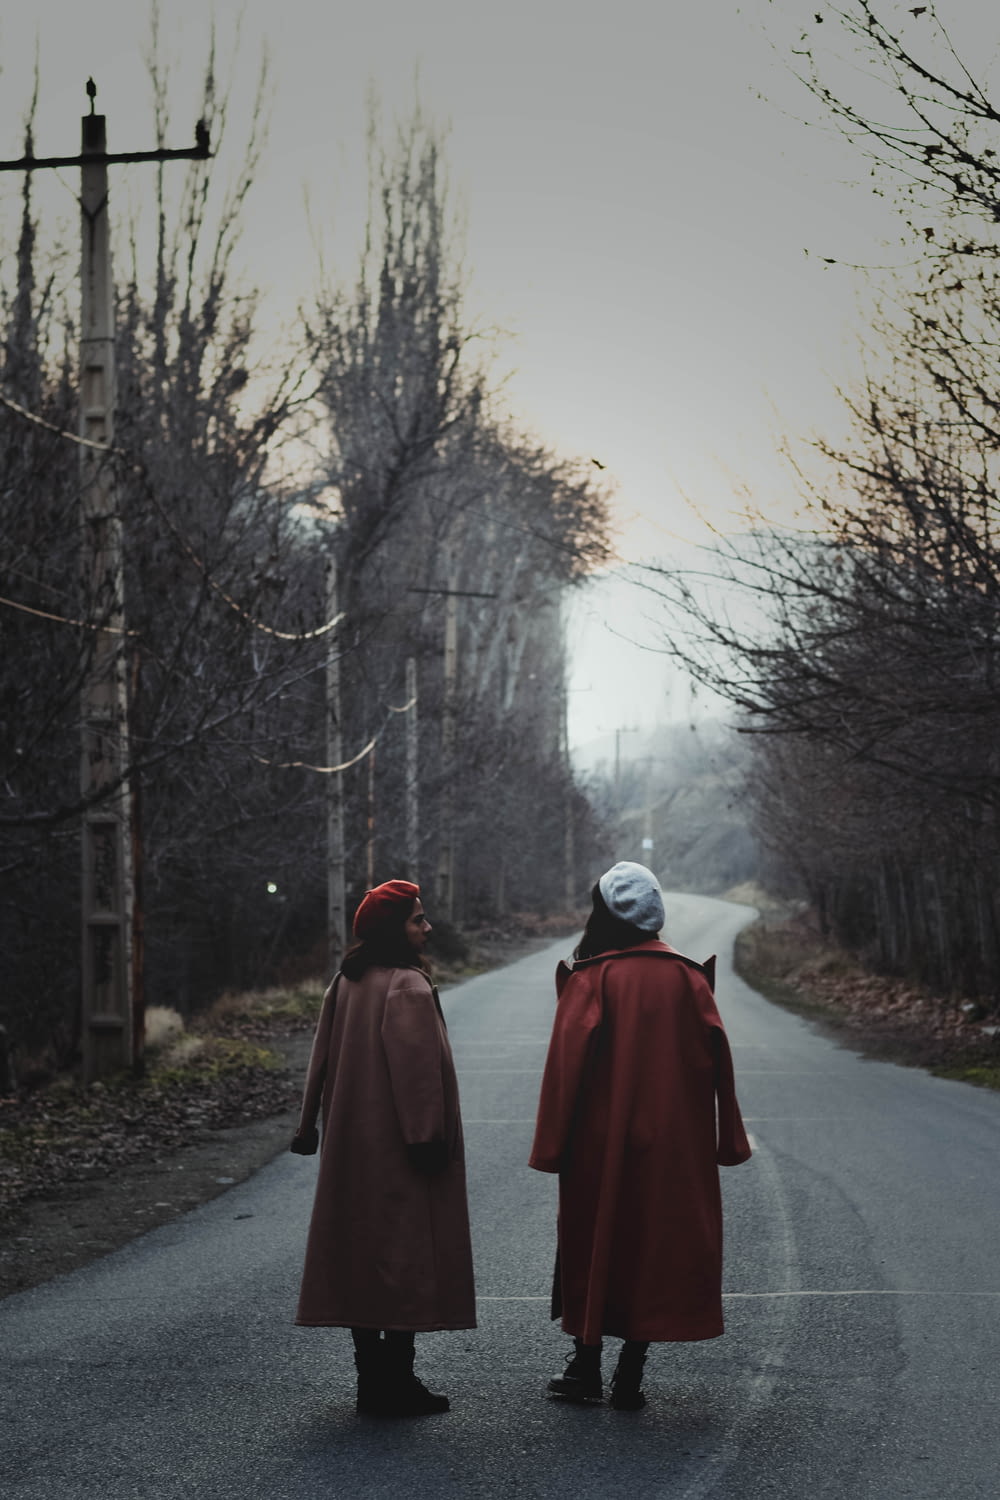 person in red coat walking on road between bare trees during daytime